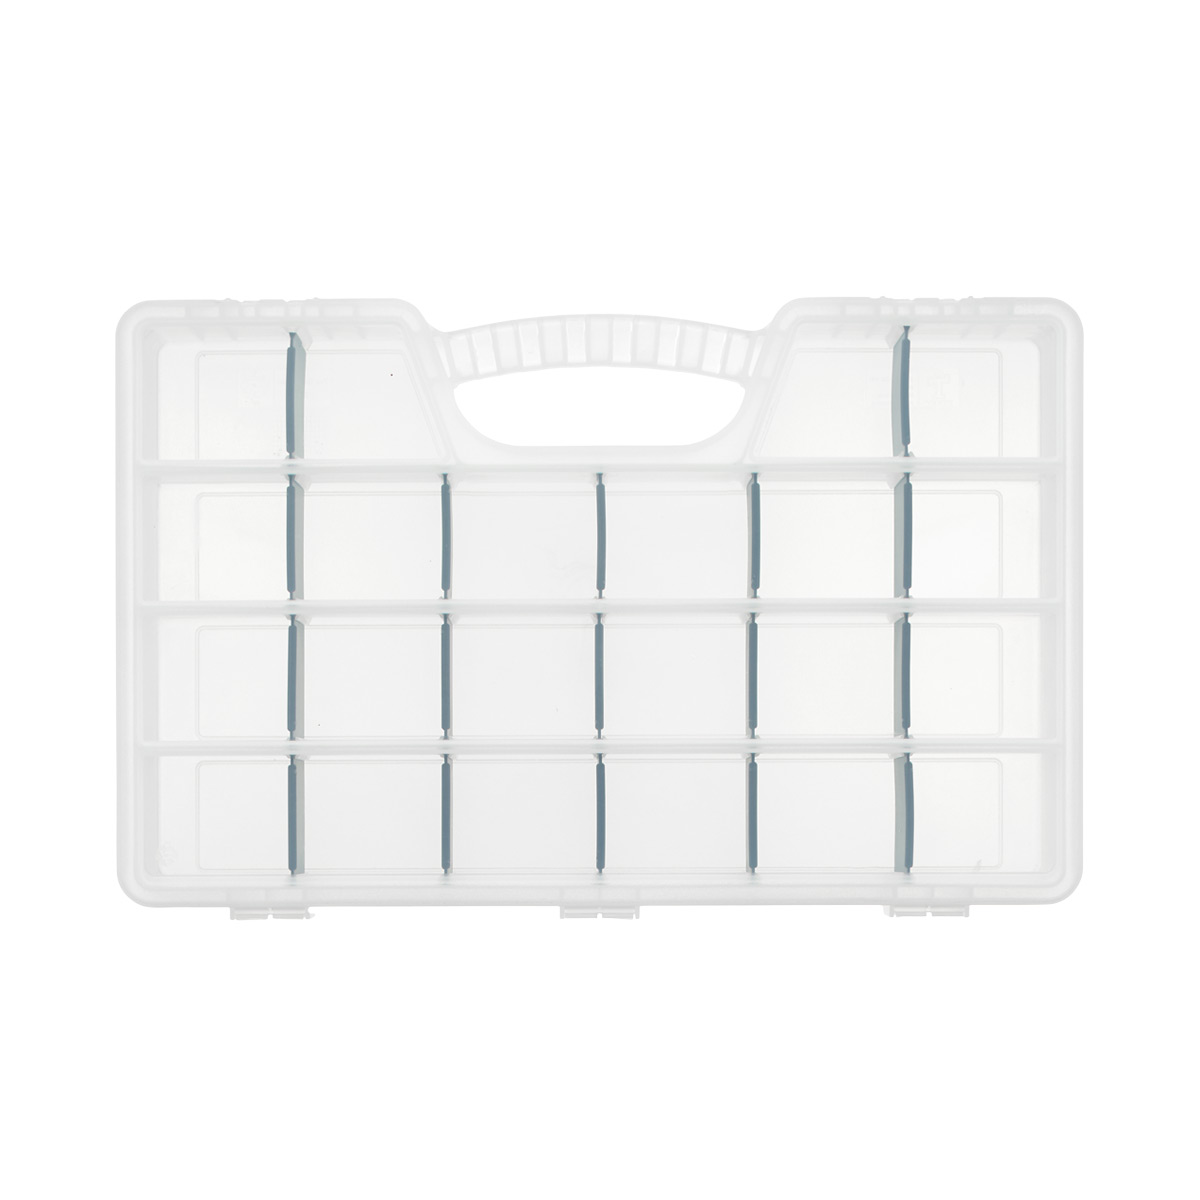 6 Pieces Nail and Screw Storage Bins Component Storage Bin with 4 Connect